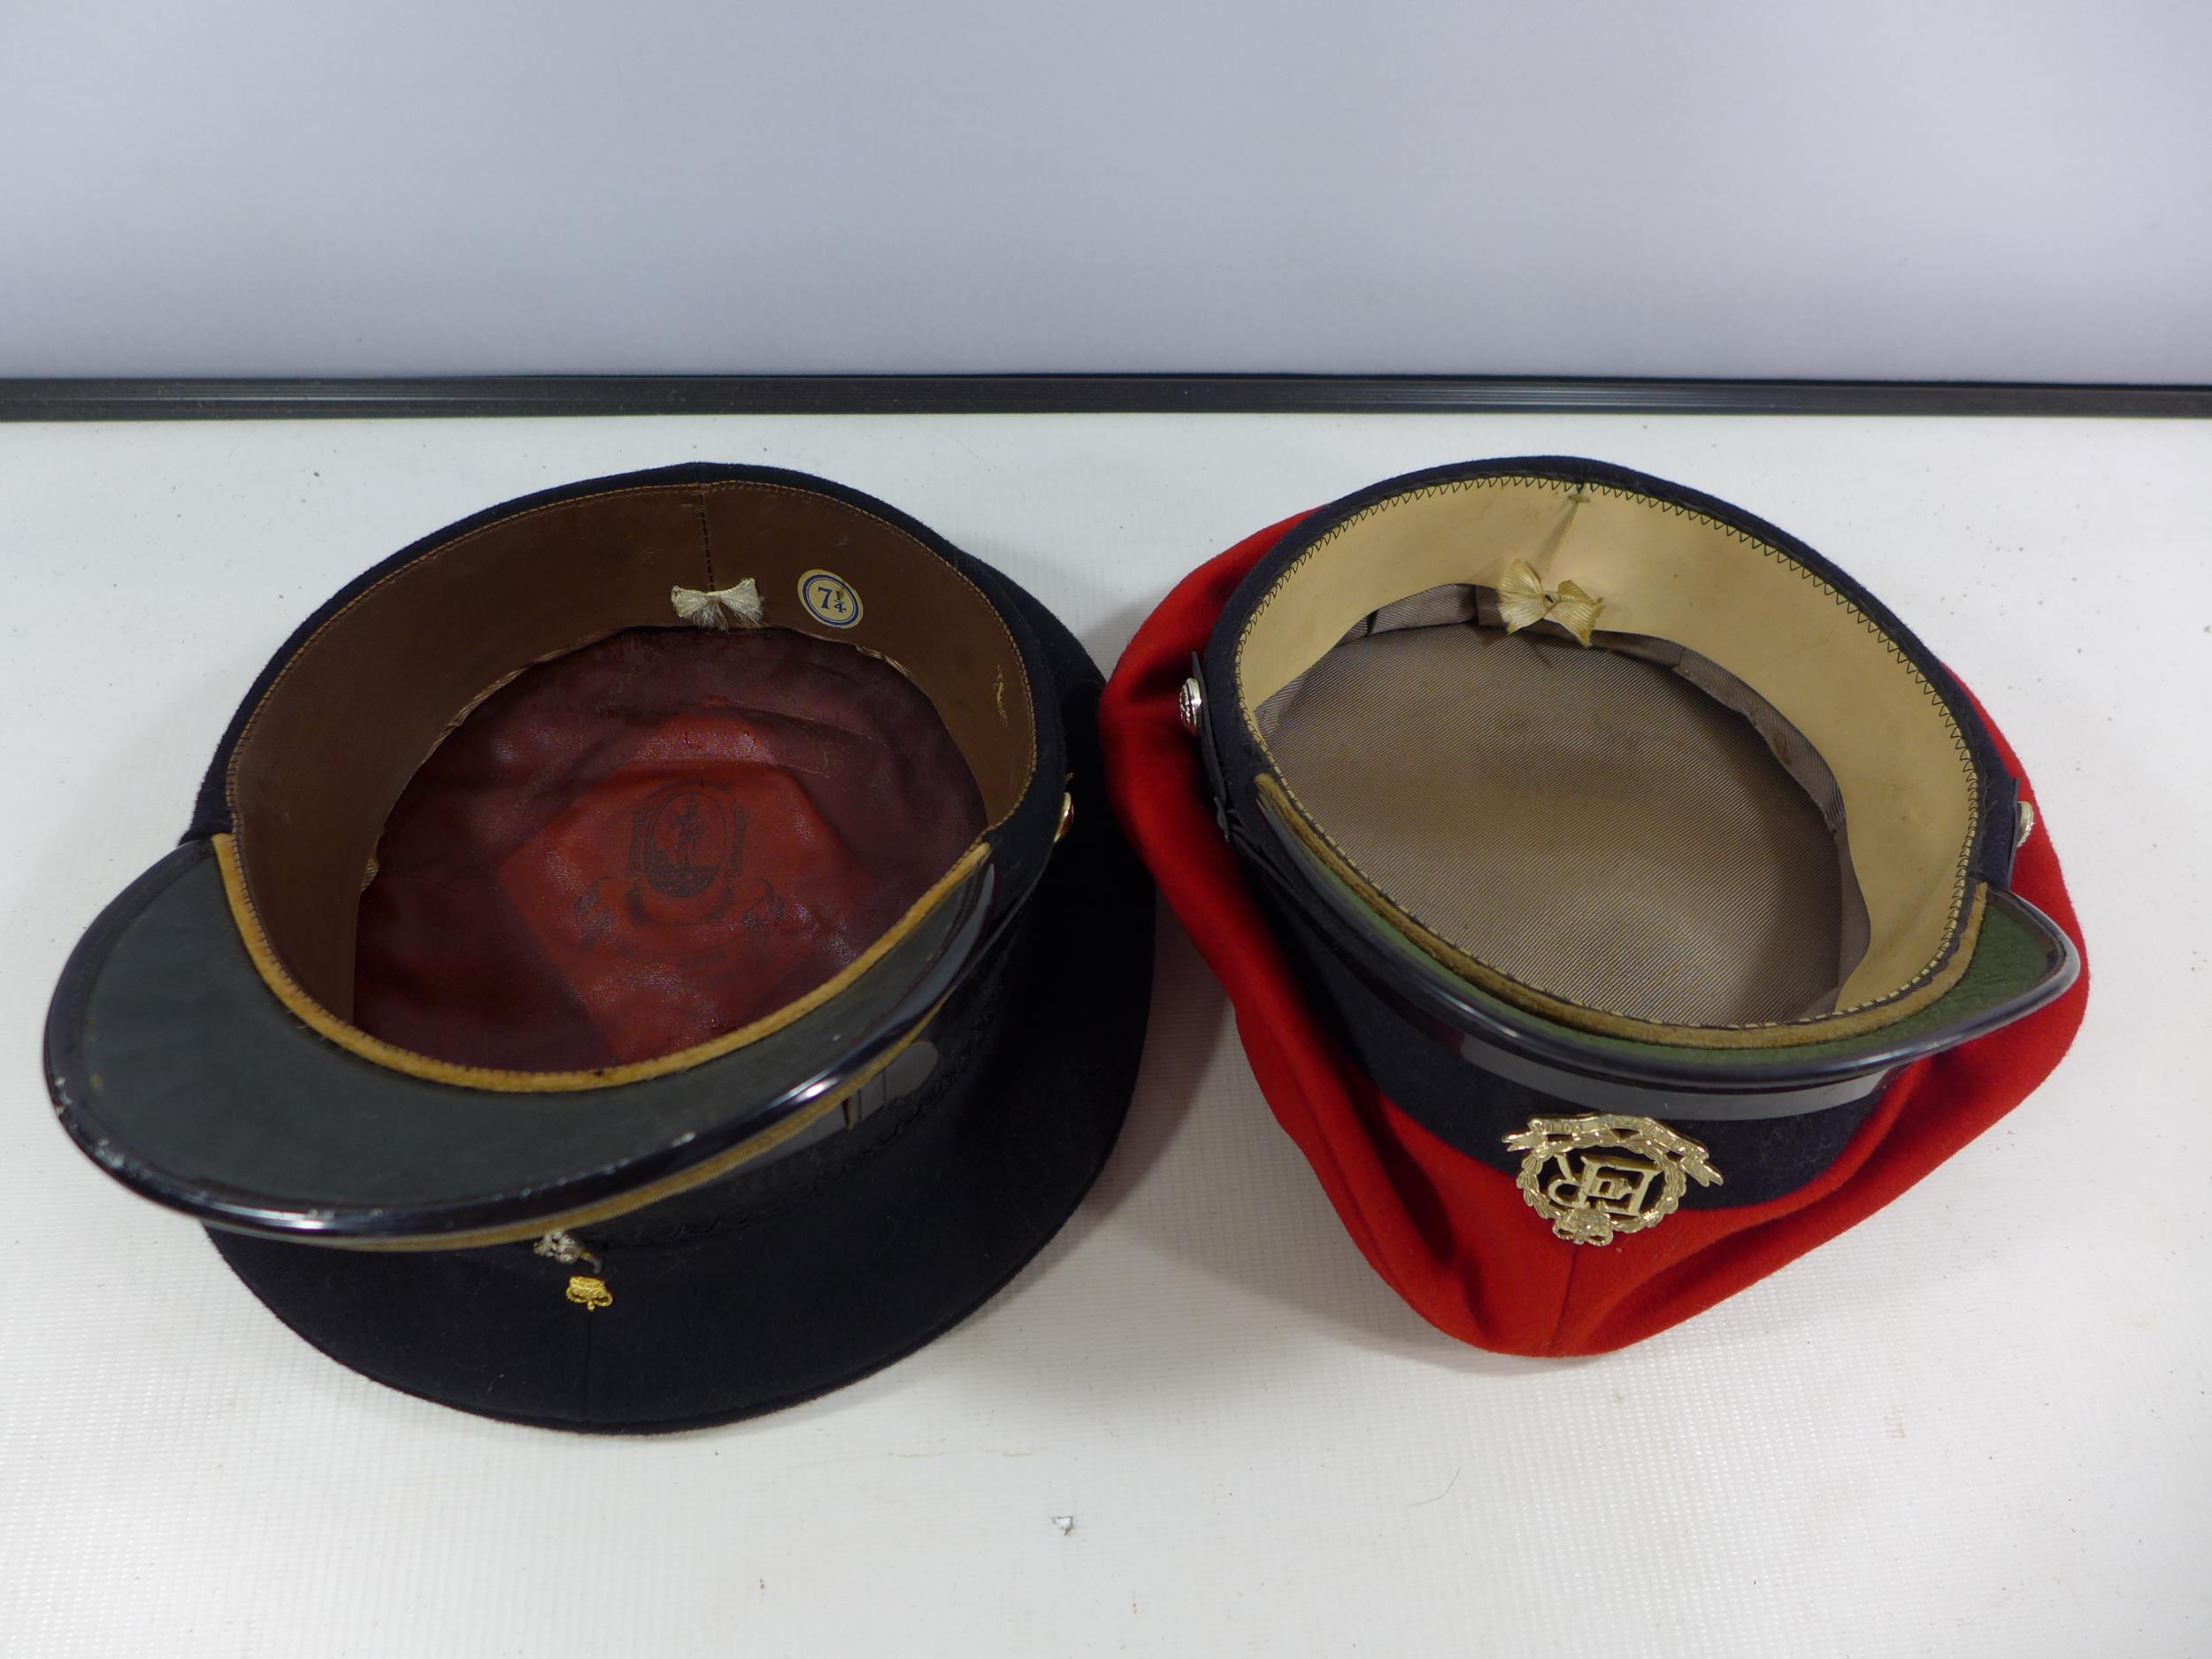 A BRITISH ROYAL MILITARY POLICE PEAKED CAP AND A ROYAL CORP OF SIGNALS PEAKED CAP, SIZE 7 1/4 - Image 4 of 4